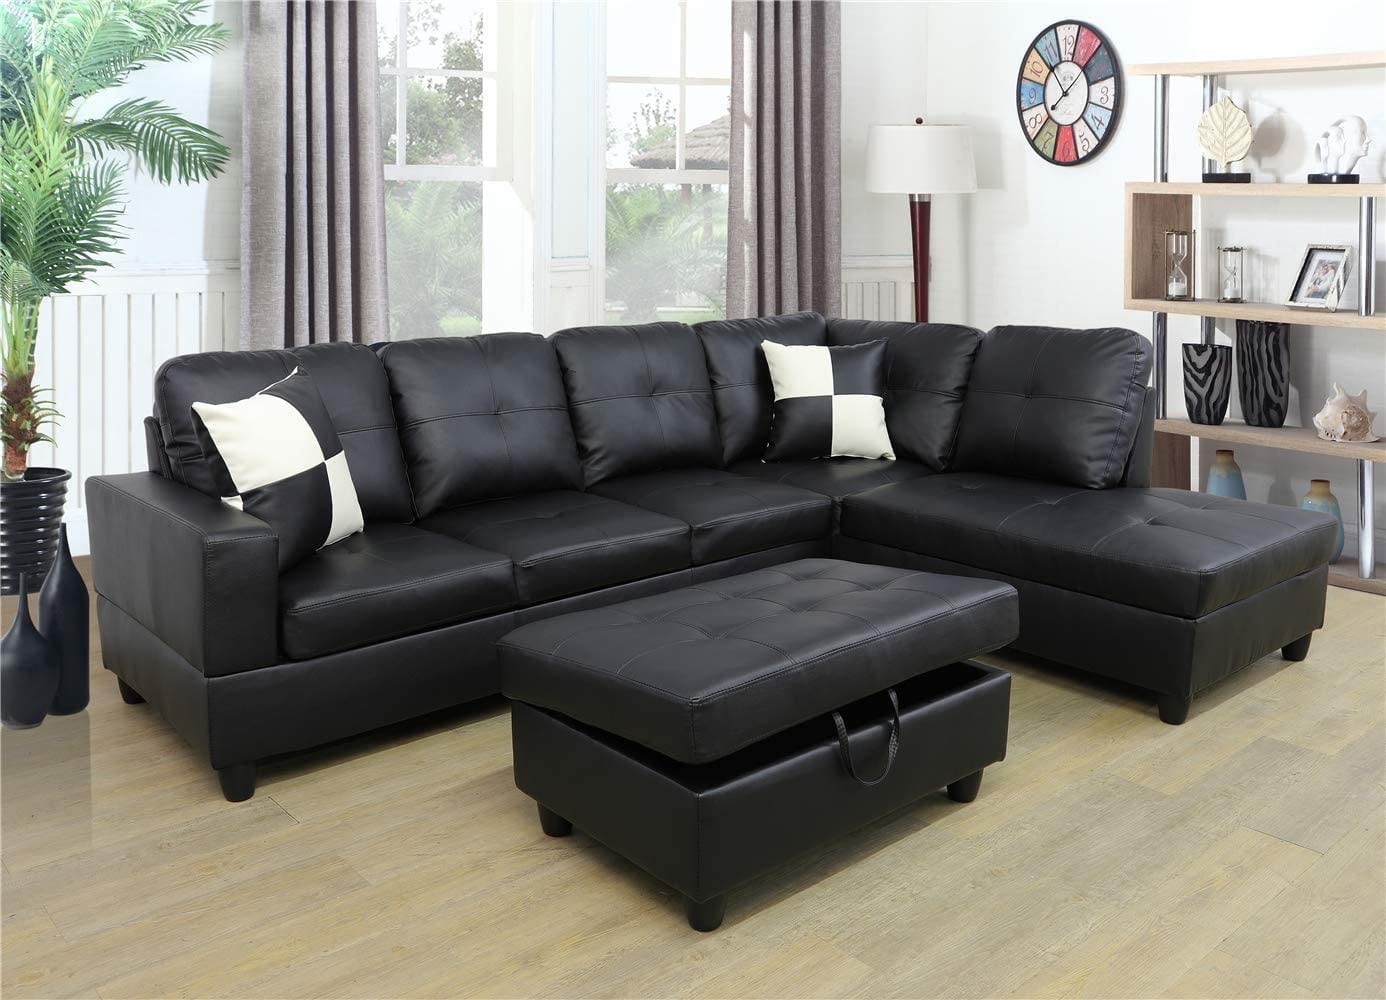 Details about   Living Room Furniture Ebony Sectional Sofa set Cushion Ottoman Couch Microfiber 